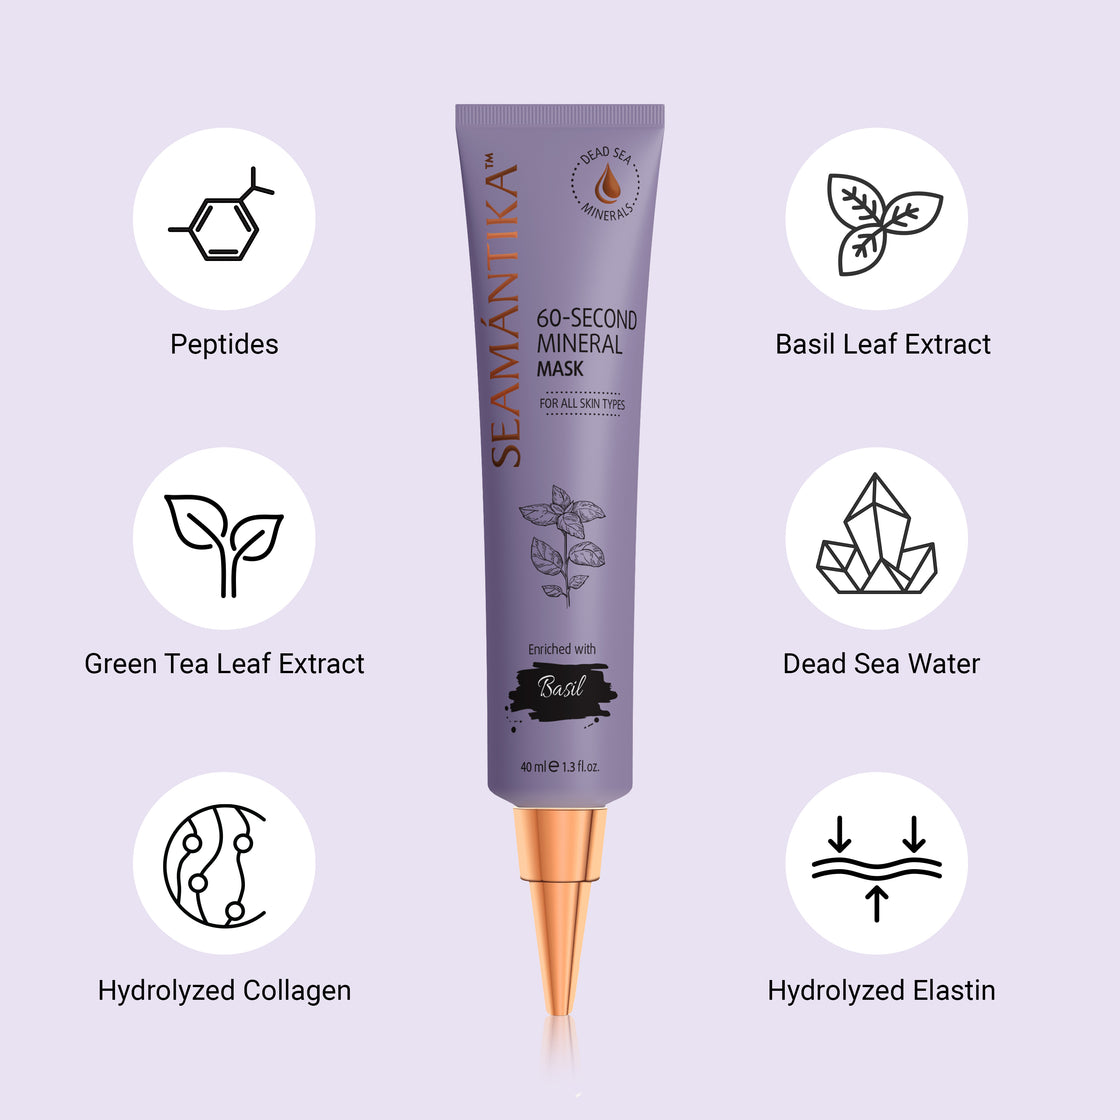 60-SECOND MINERAL MASK - BASIL LEAF EXTRACT